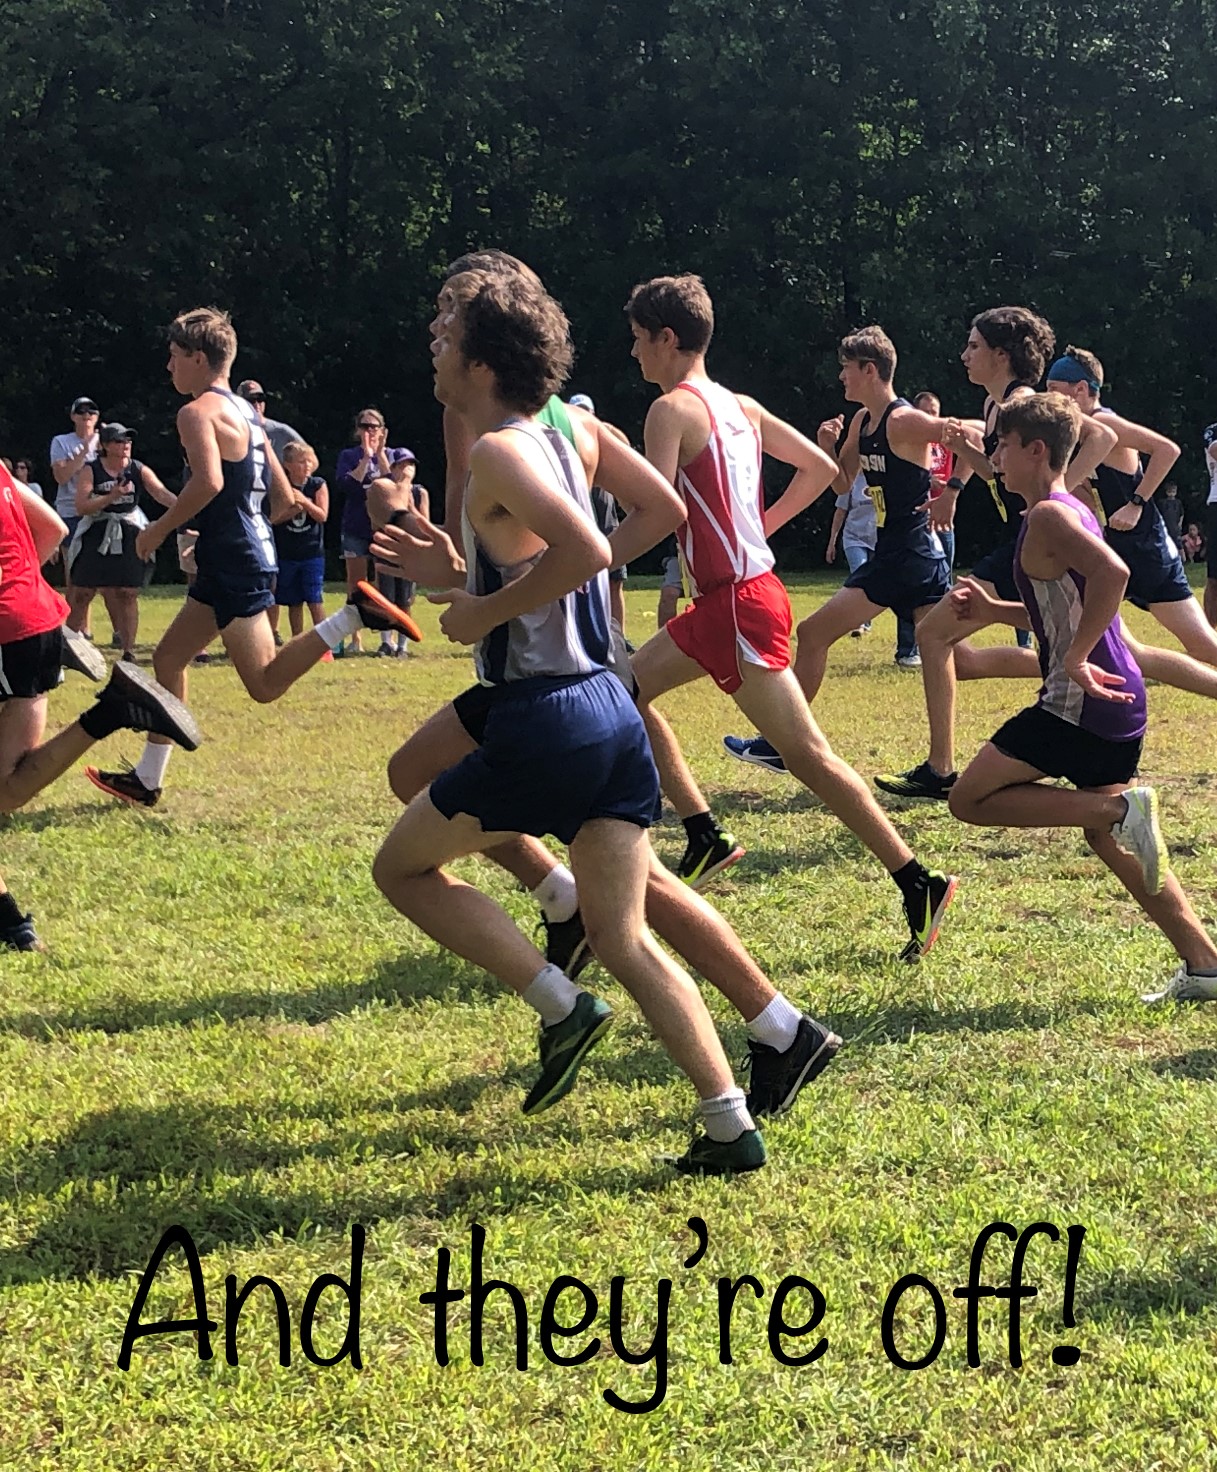 Boys cross country athletes running with the statement "and they're off!"